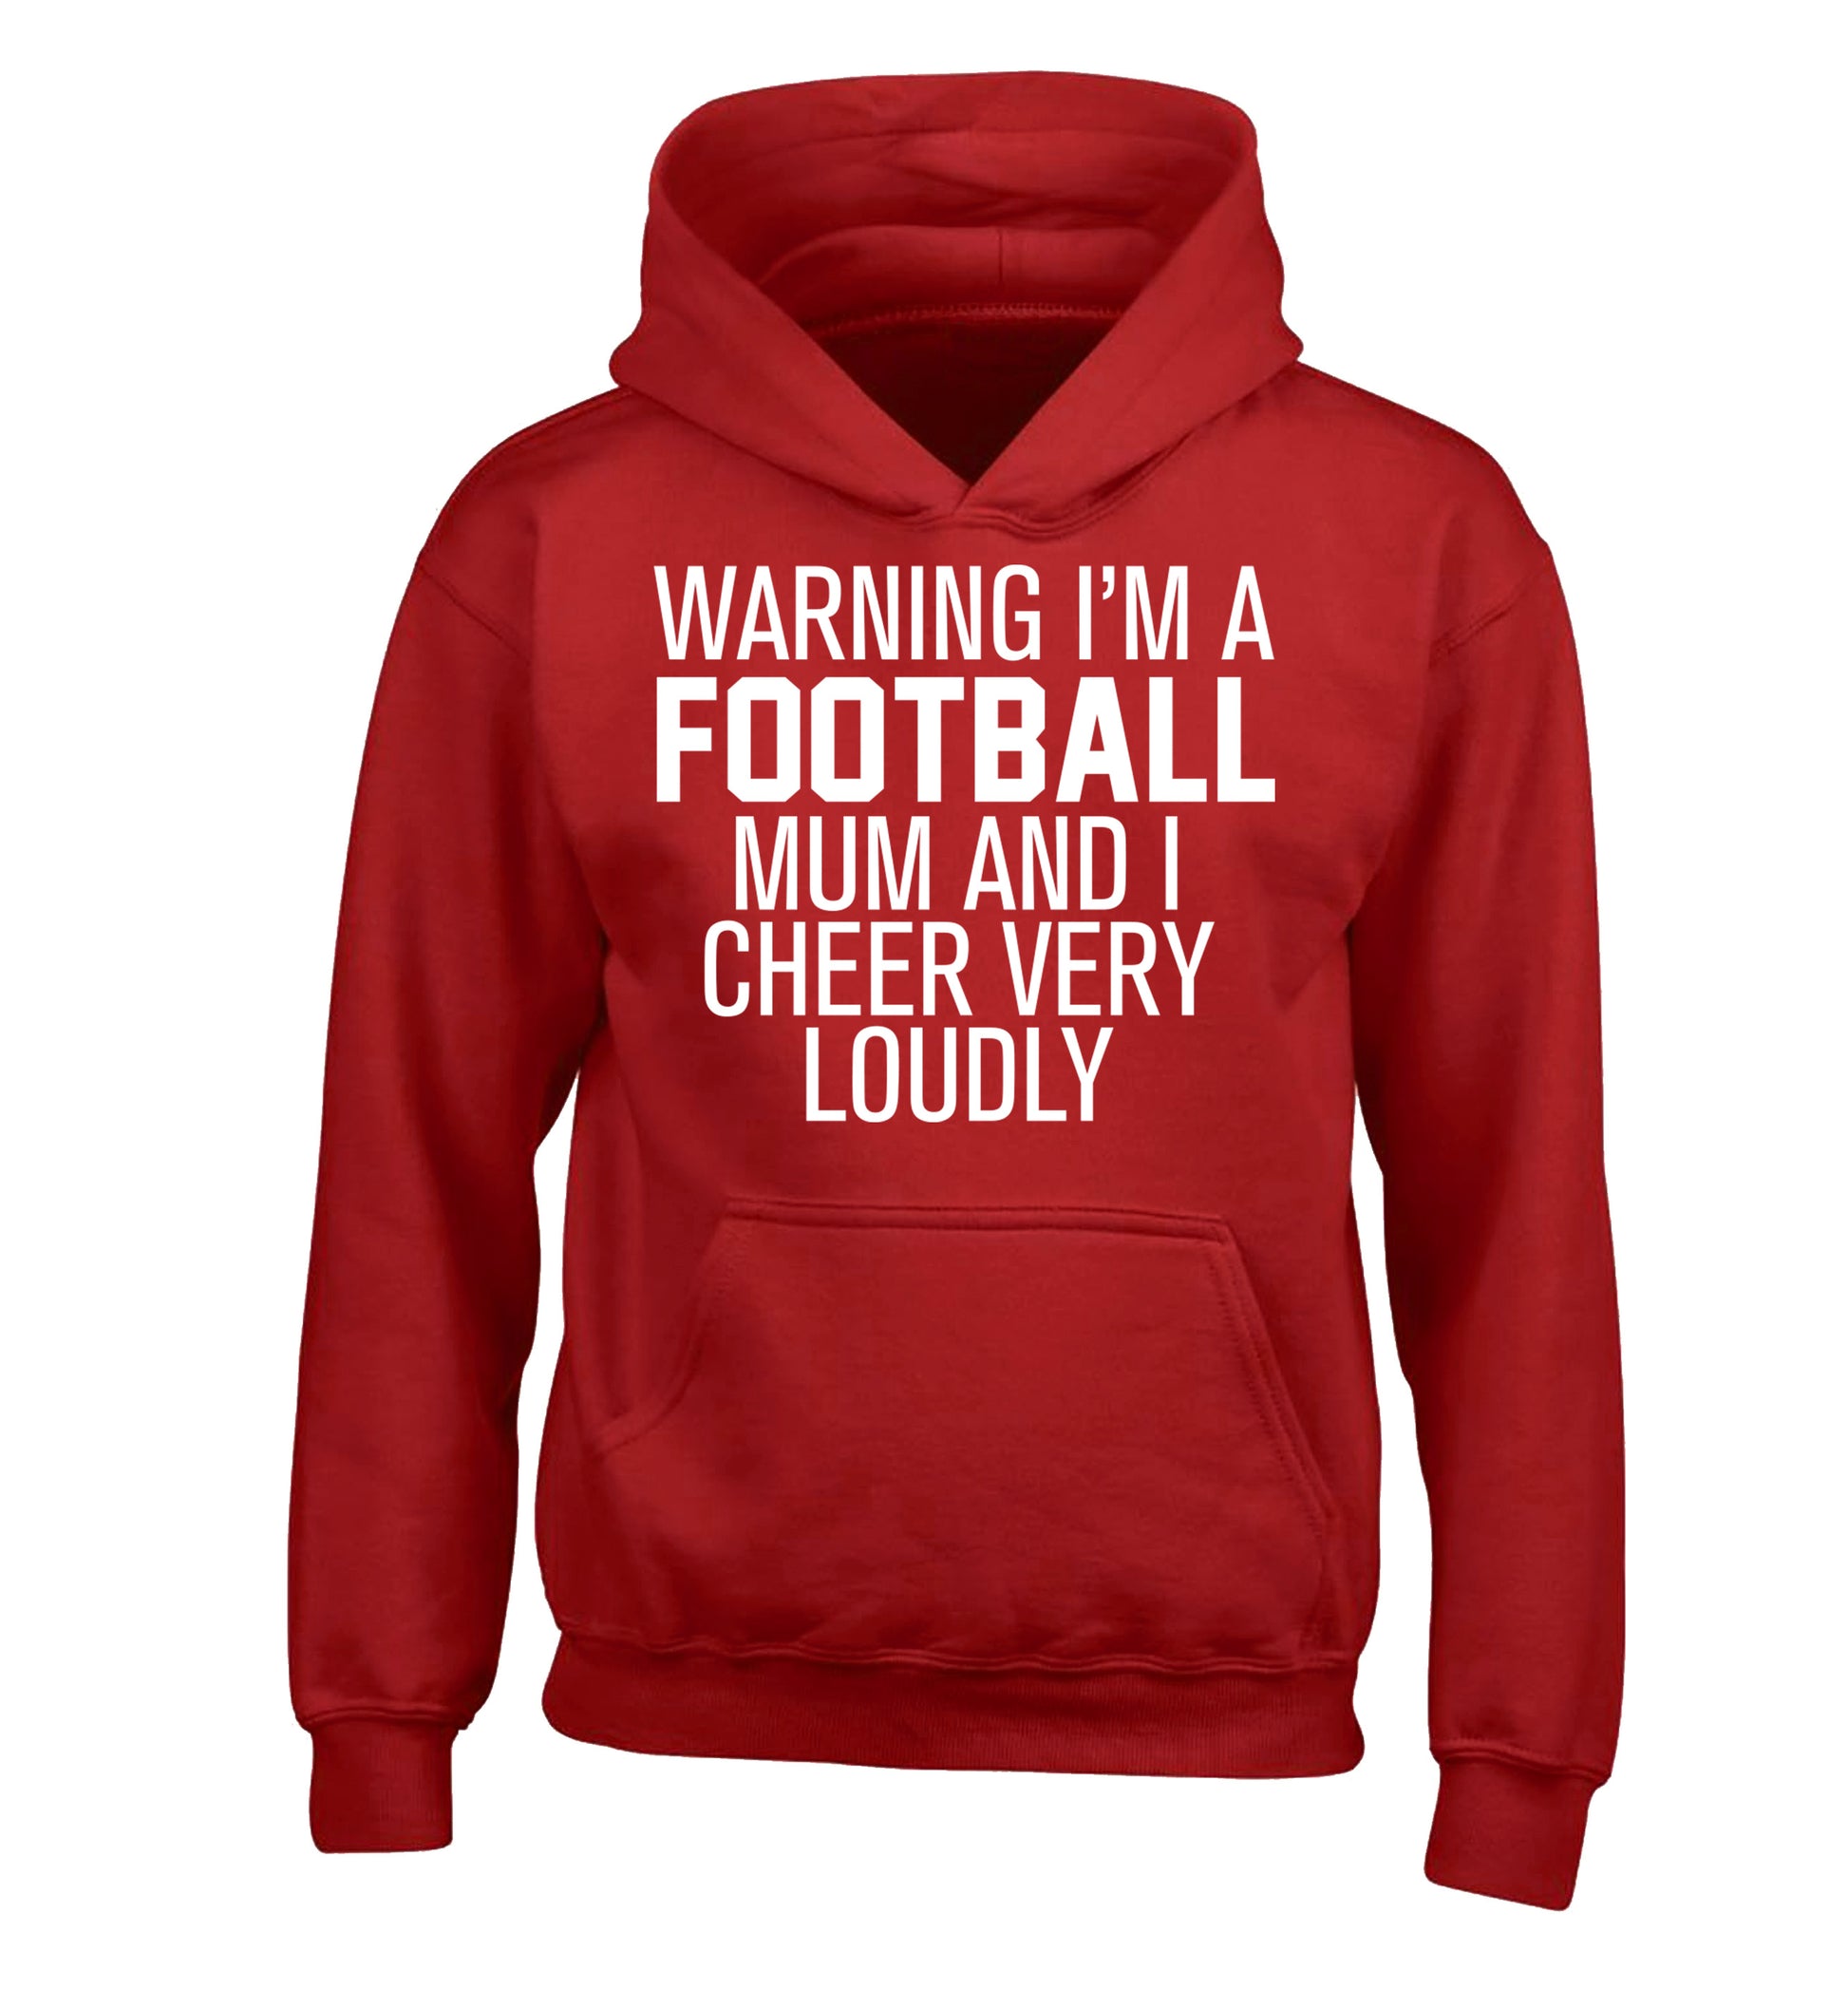 Warning I'm a football mum and I cheer very loudly children's red hoodie 12-14 Years